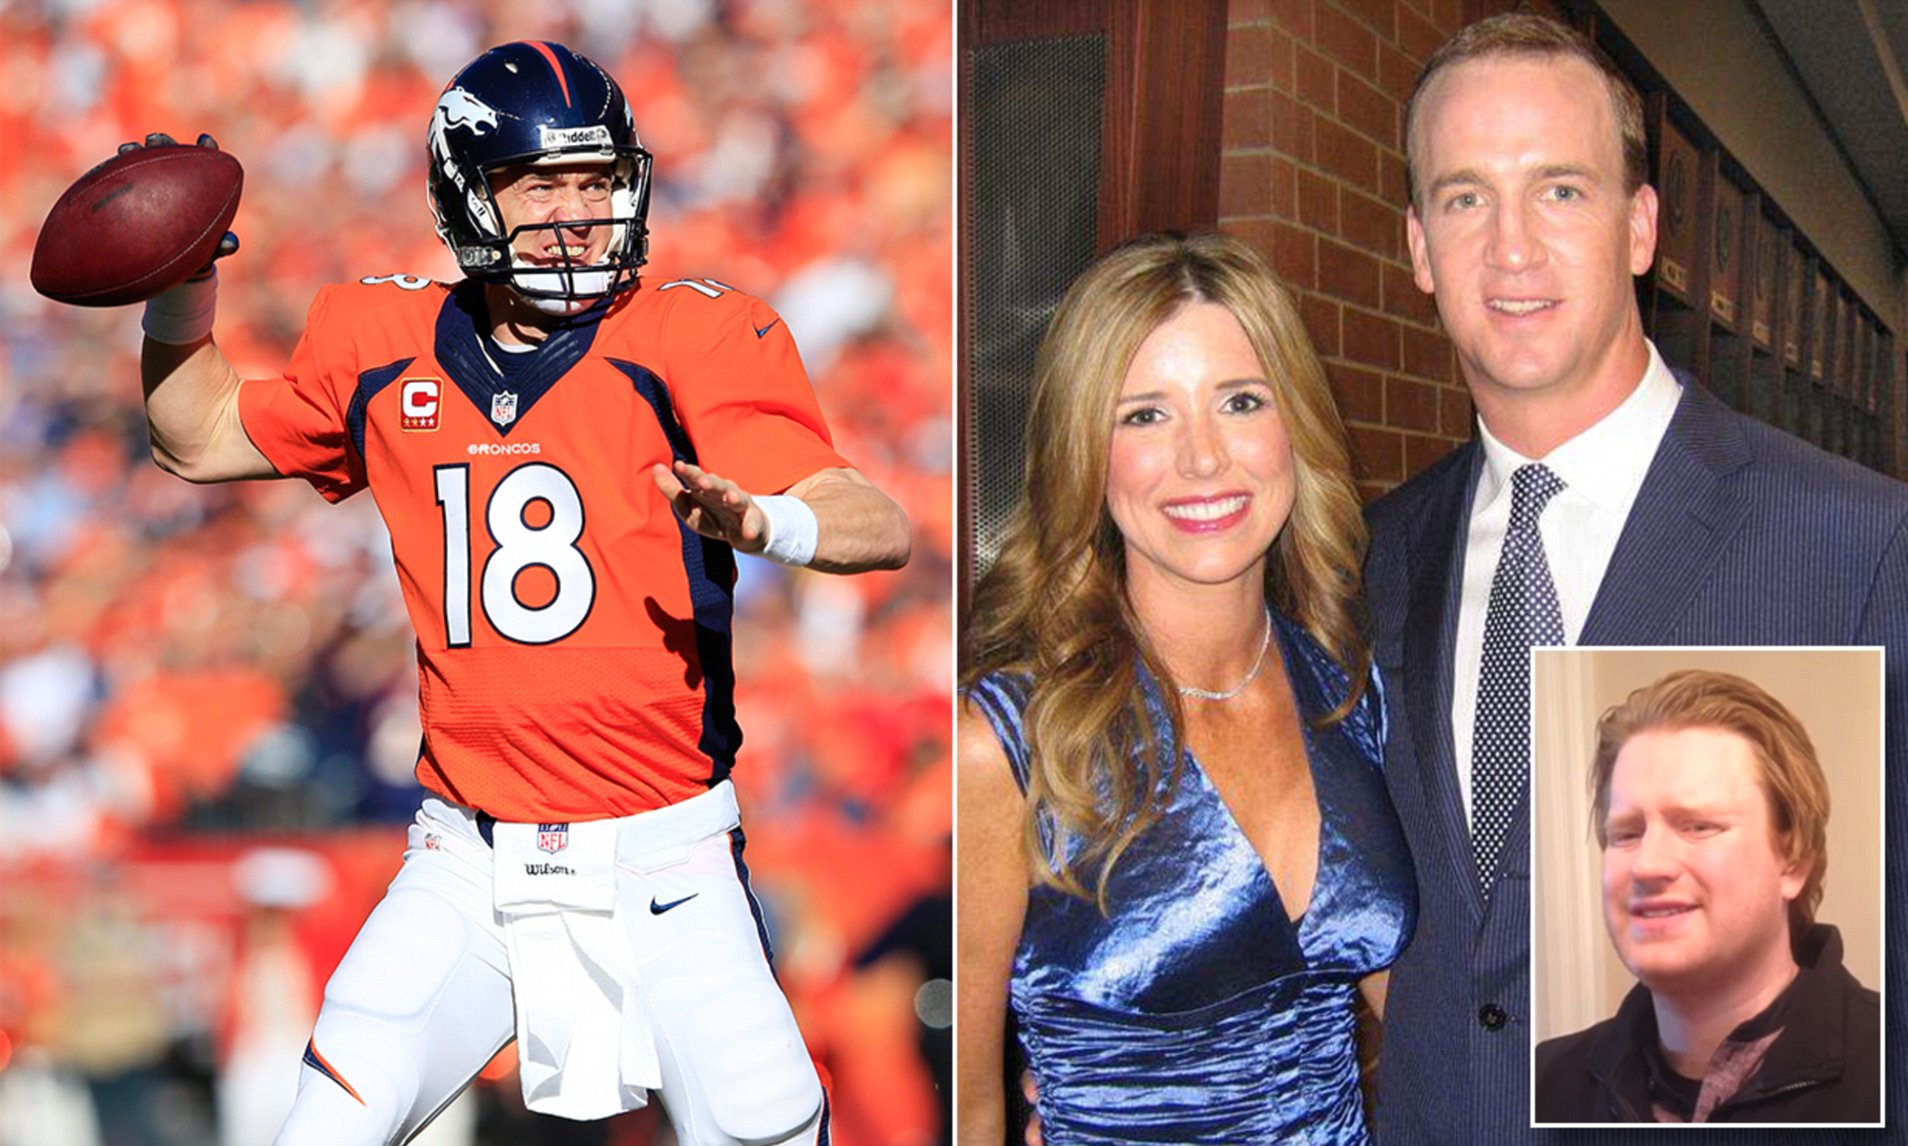 How many NFL MVP awards did Peyton Manning win?